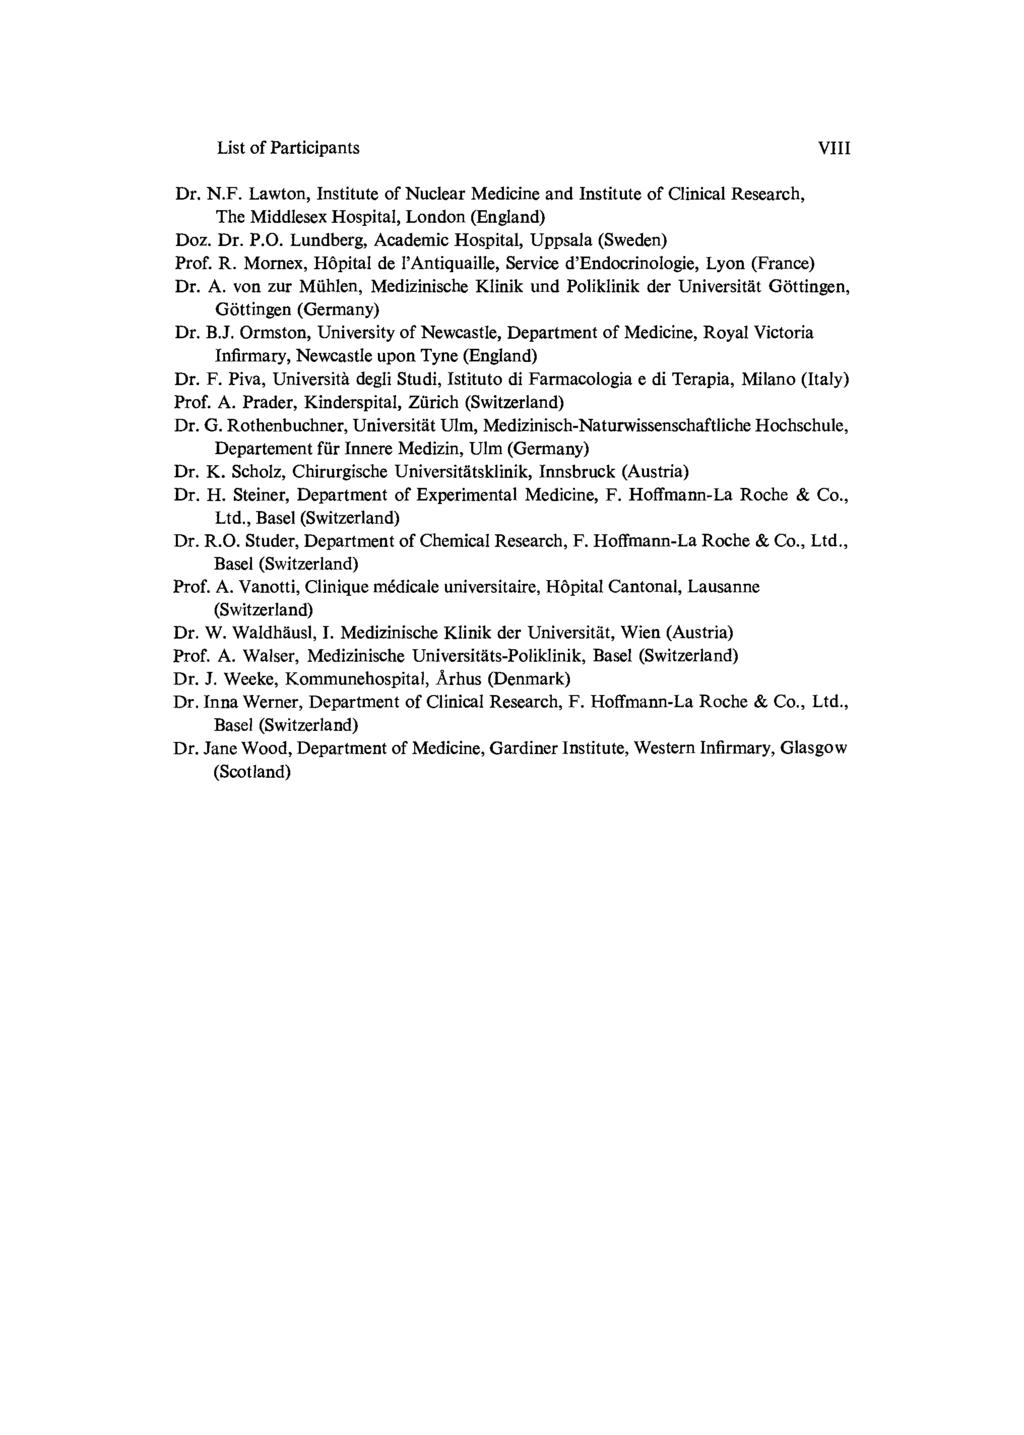 List of Participants VIII Dr. N.F. Lawton, Institute of Nuclear Medicine and Institute of Clinical Research, The Middlesex Hospital, London (England) Doz. Dr. P.O.